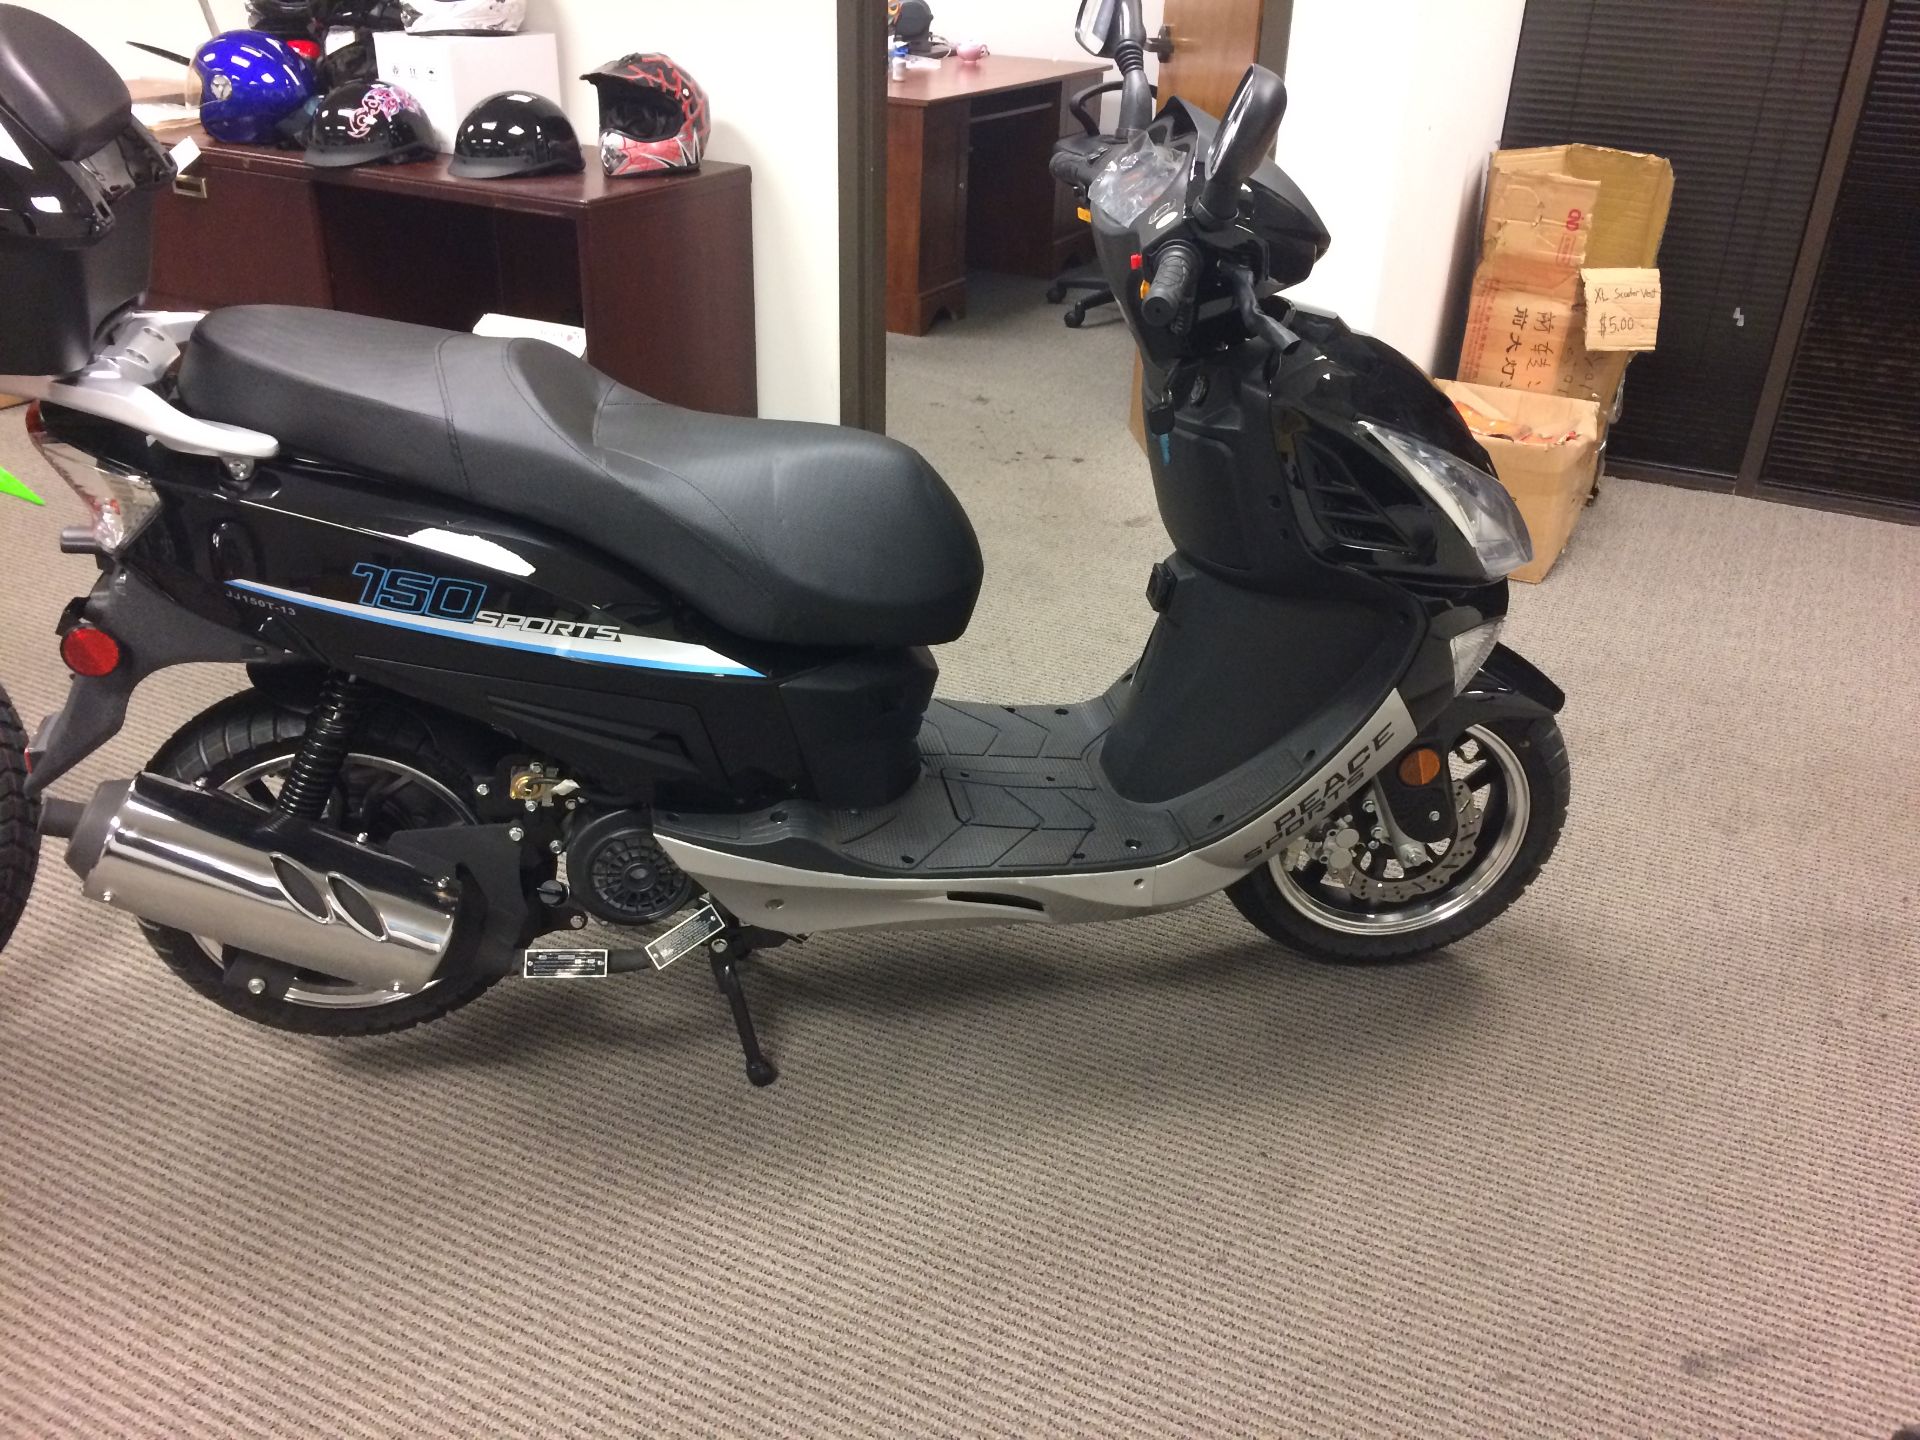 Peace Sports SPORTS 150 Scooter, 149cc, Auto Transmission, Air Cooling (GY6)